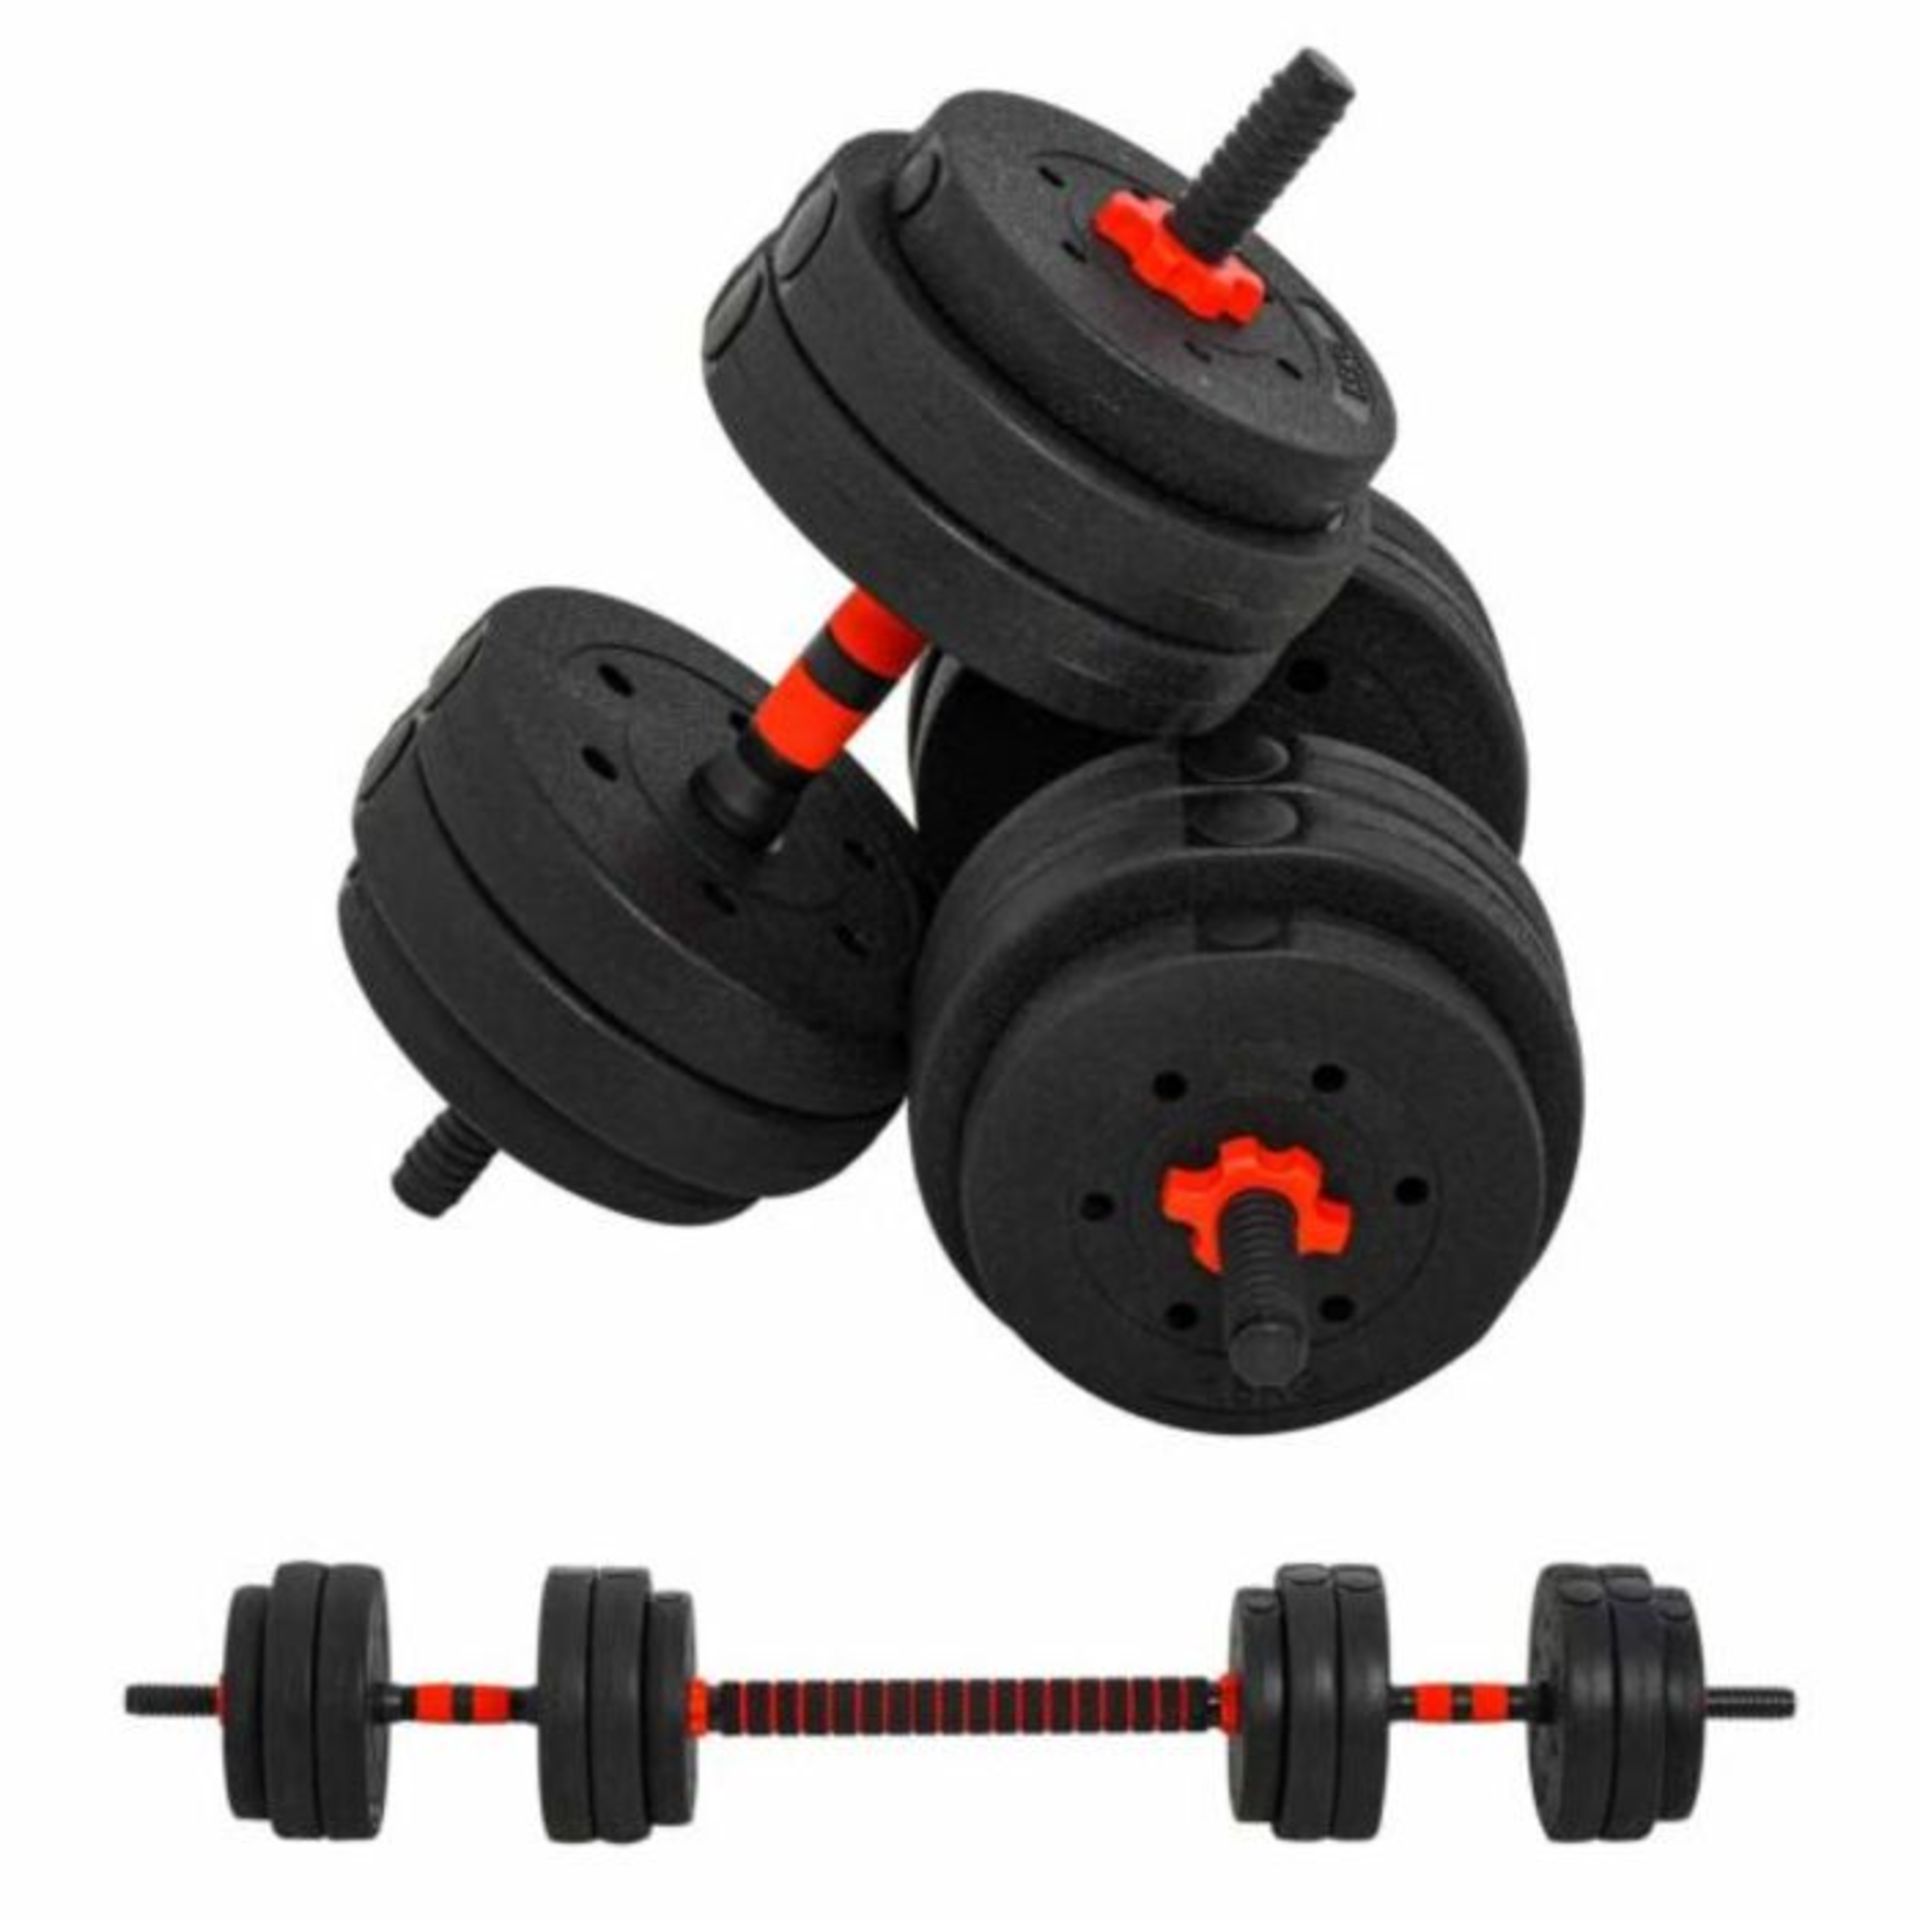 2 in 1 30KG dumbell and barbell set, new and boxed